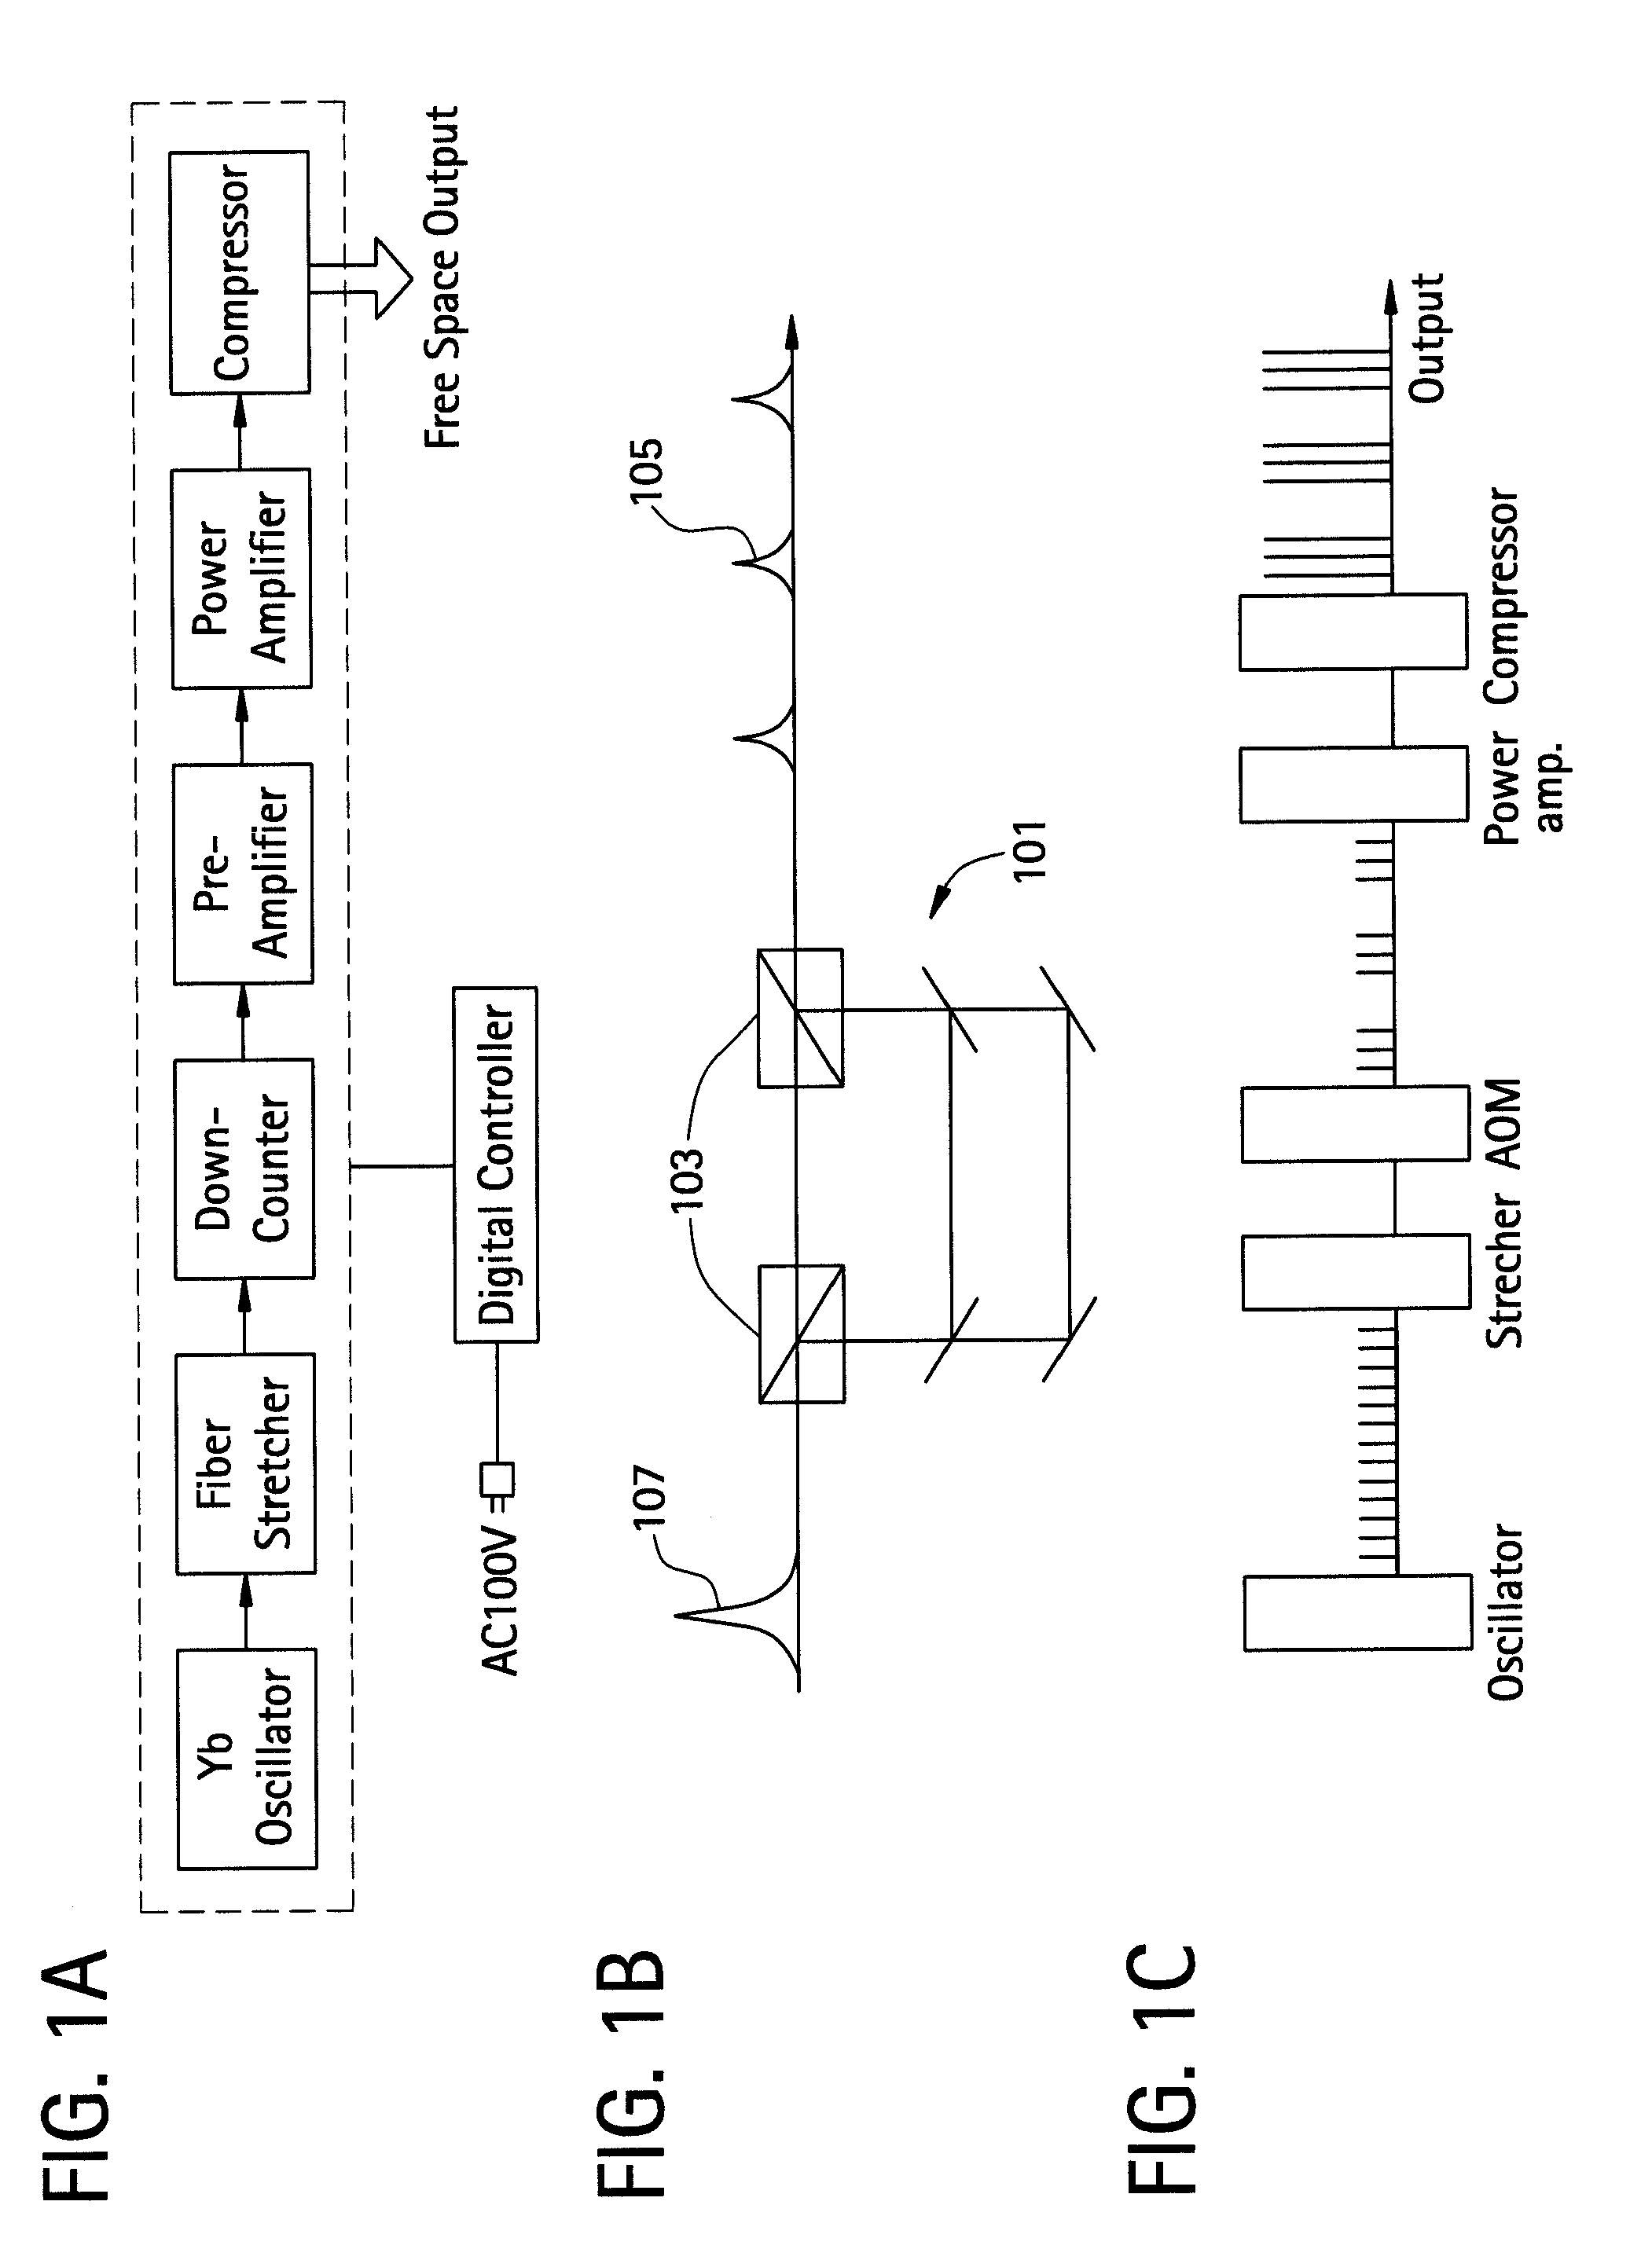 Method for fabricating thin films